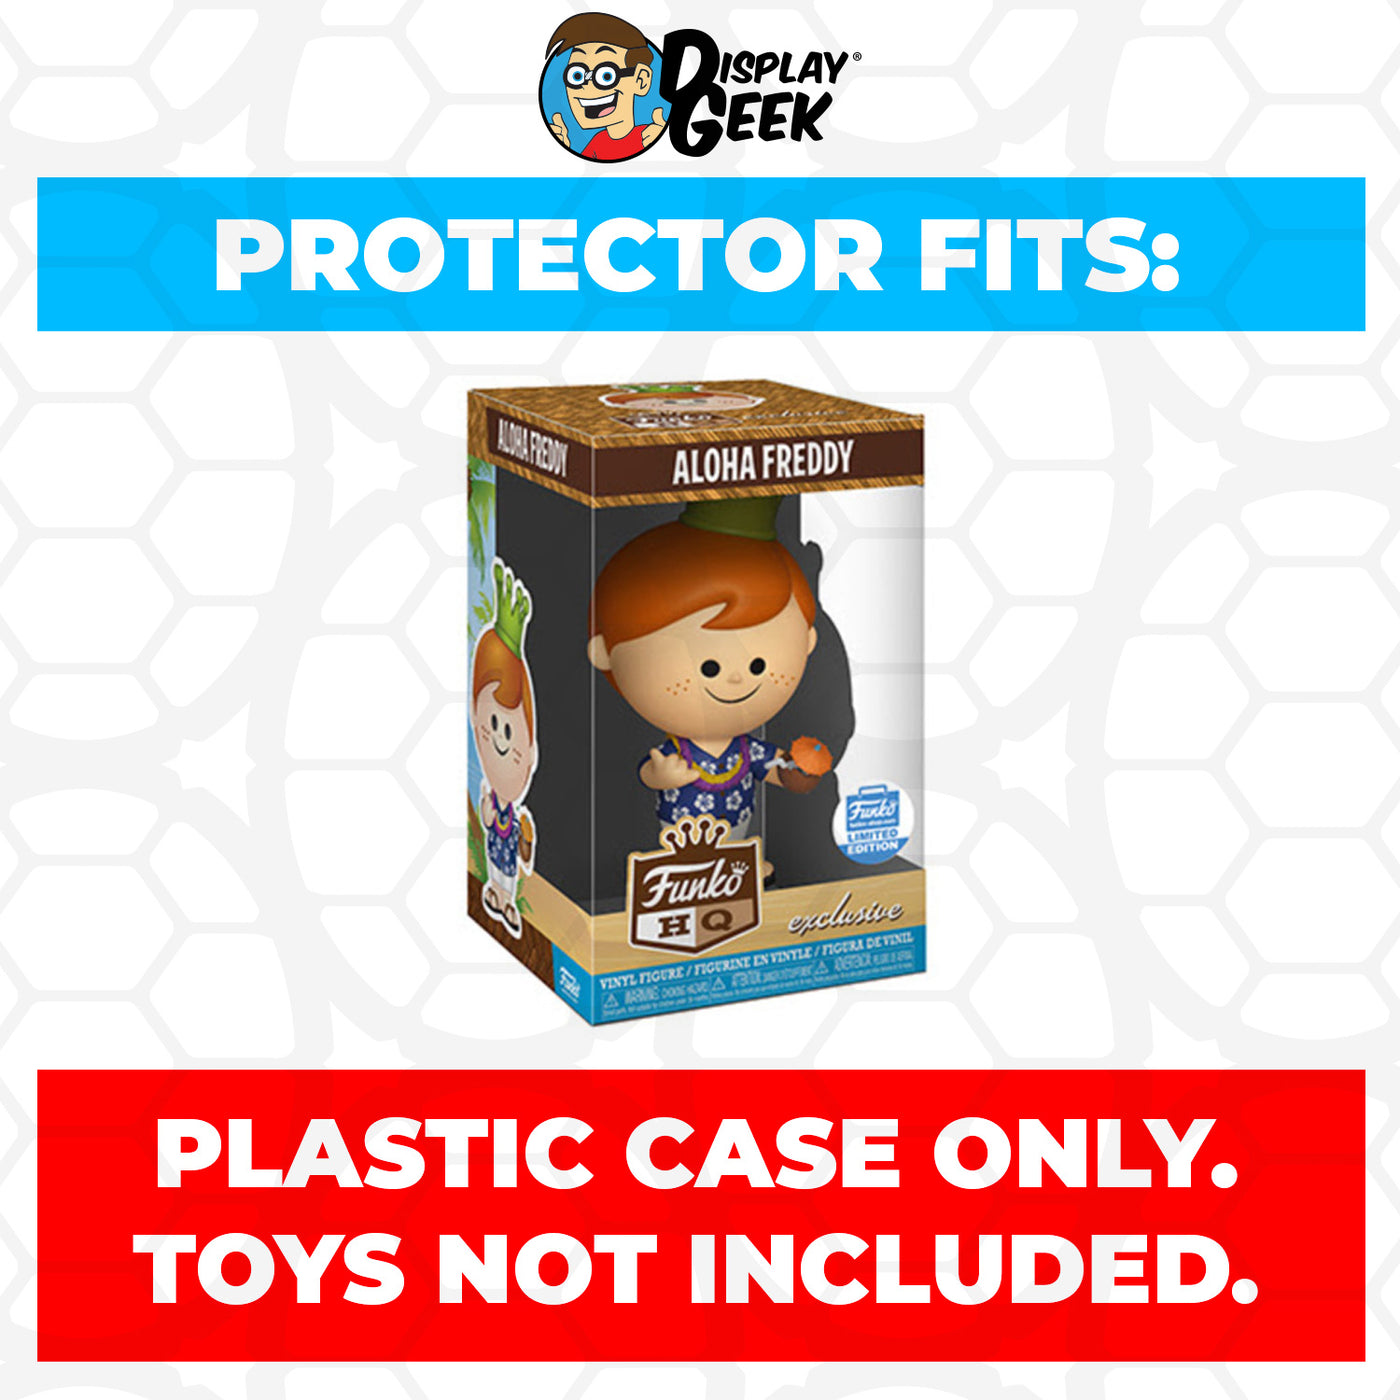 Pop Protector for Freddy Funko Aloha Freddy on The Protector Guide App by Display Geek